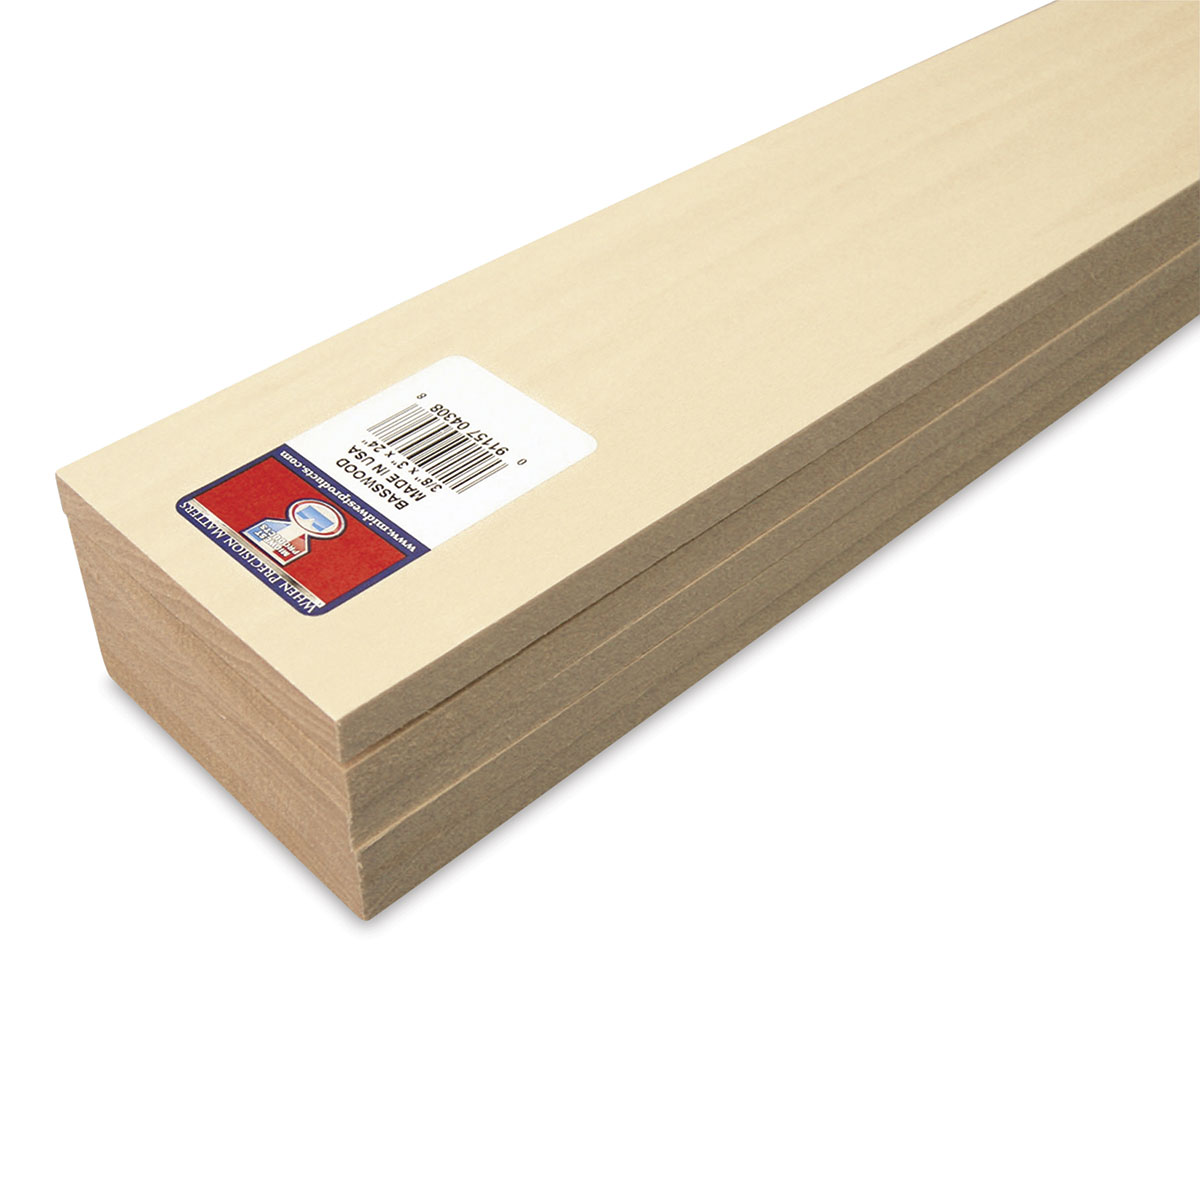 Midwest Products 5006 1/4 x 4 x 36 Basswood Sheet (Pack of 5)